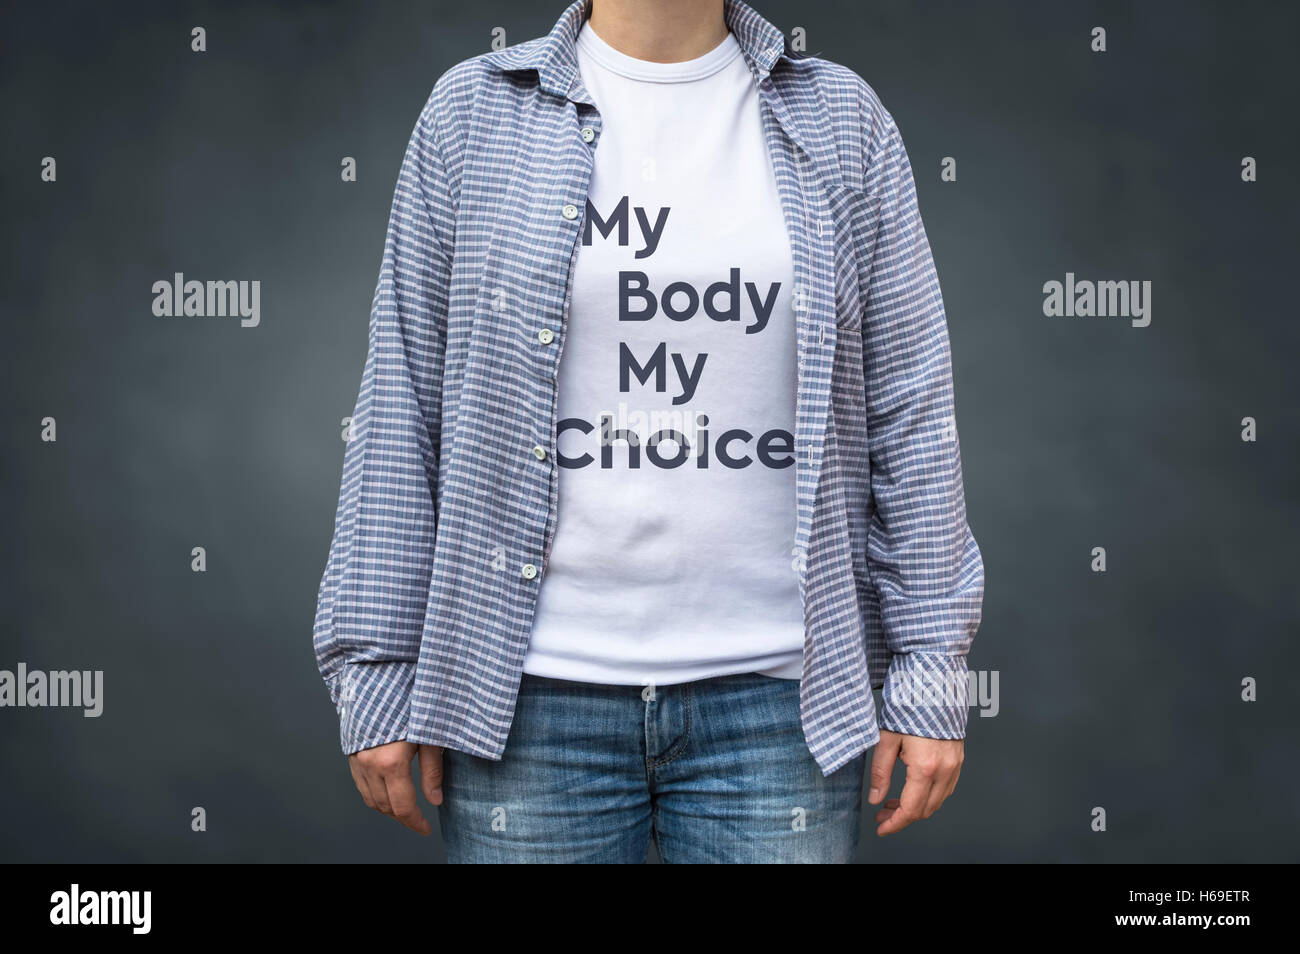 My body my choice message on white t-shirt. Selective focus. Stock Photo